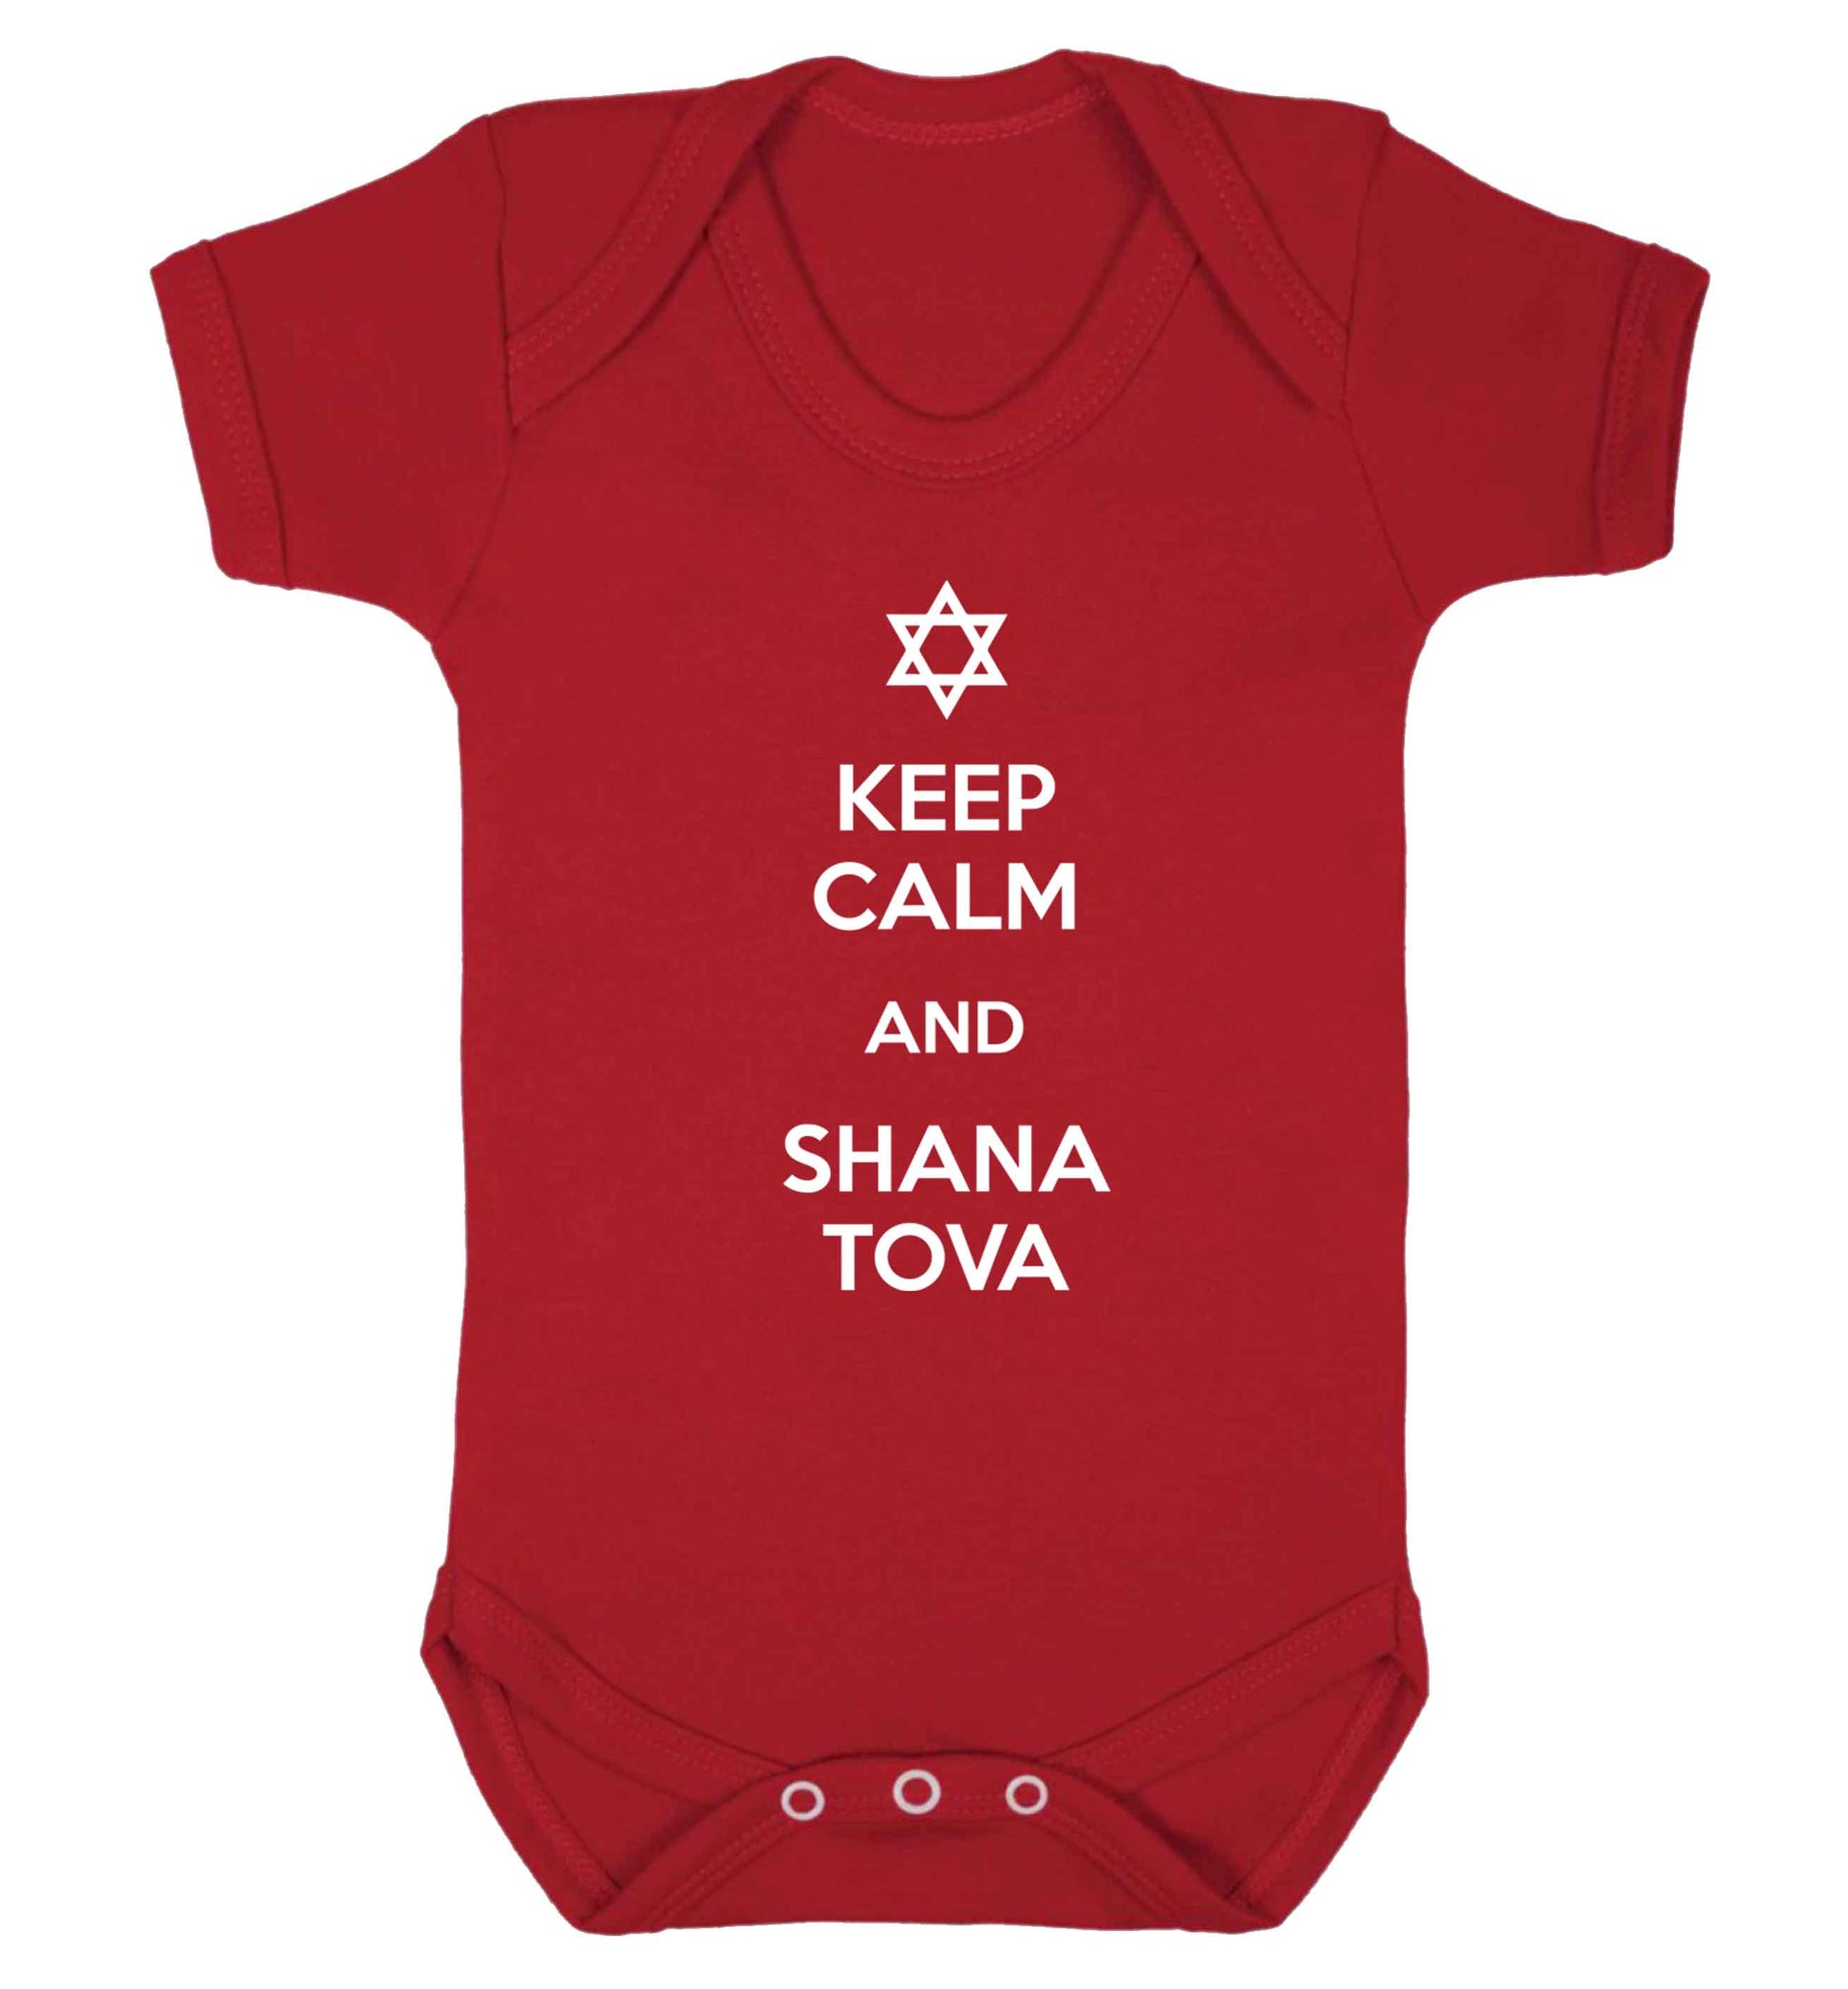 Keep calm and shana tova Baby Vest red 18-24 months